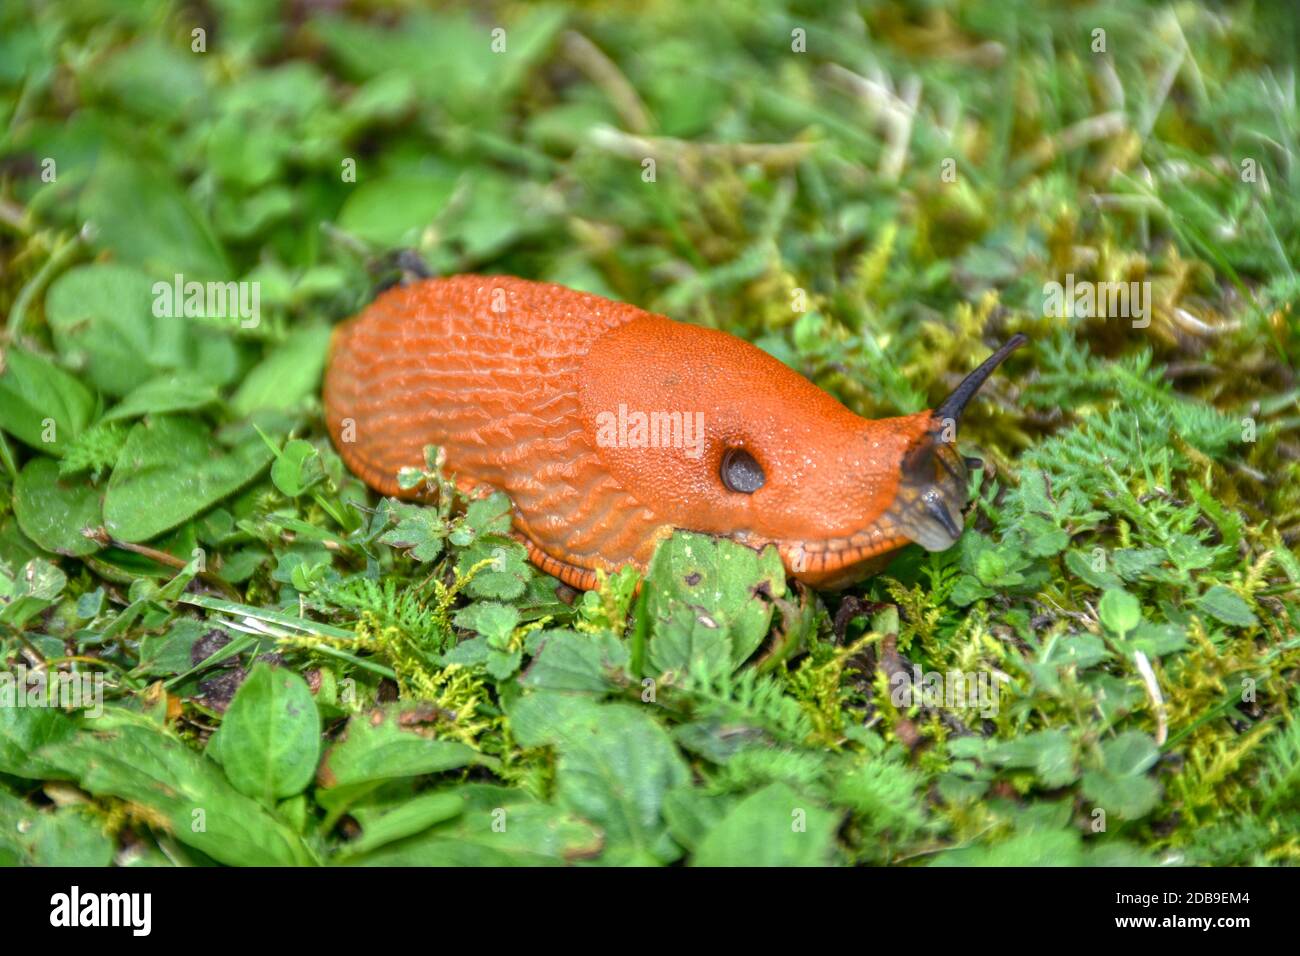 Page 2 - Schleim High Resolution Stock Photography and Images - Alamy